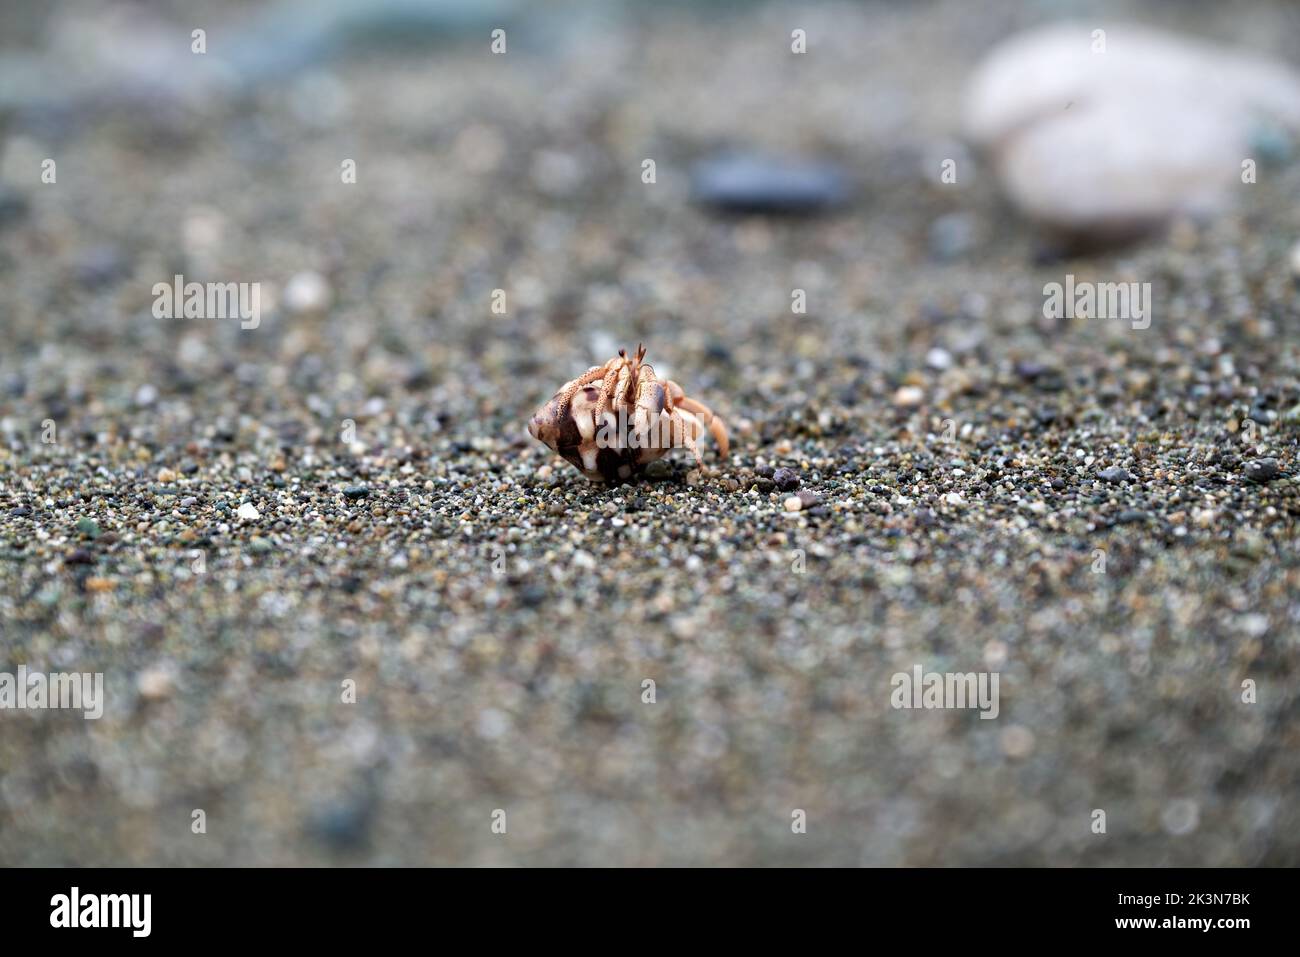 A closeup shot of a crab on the sand Stock Photo